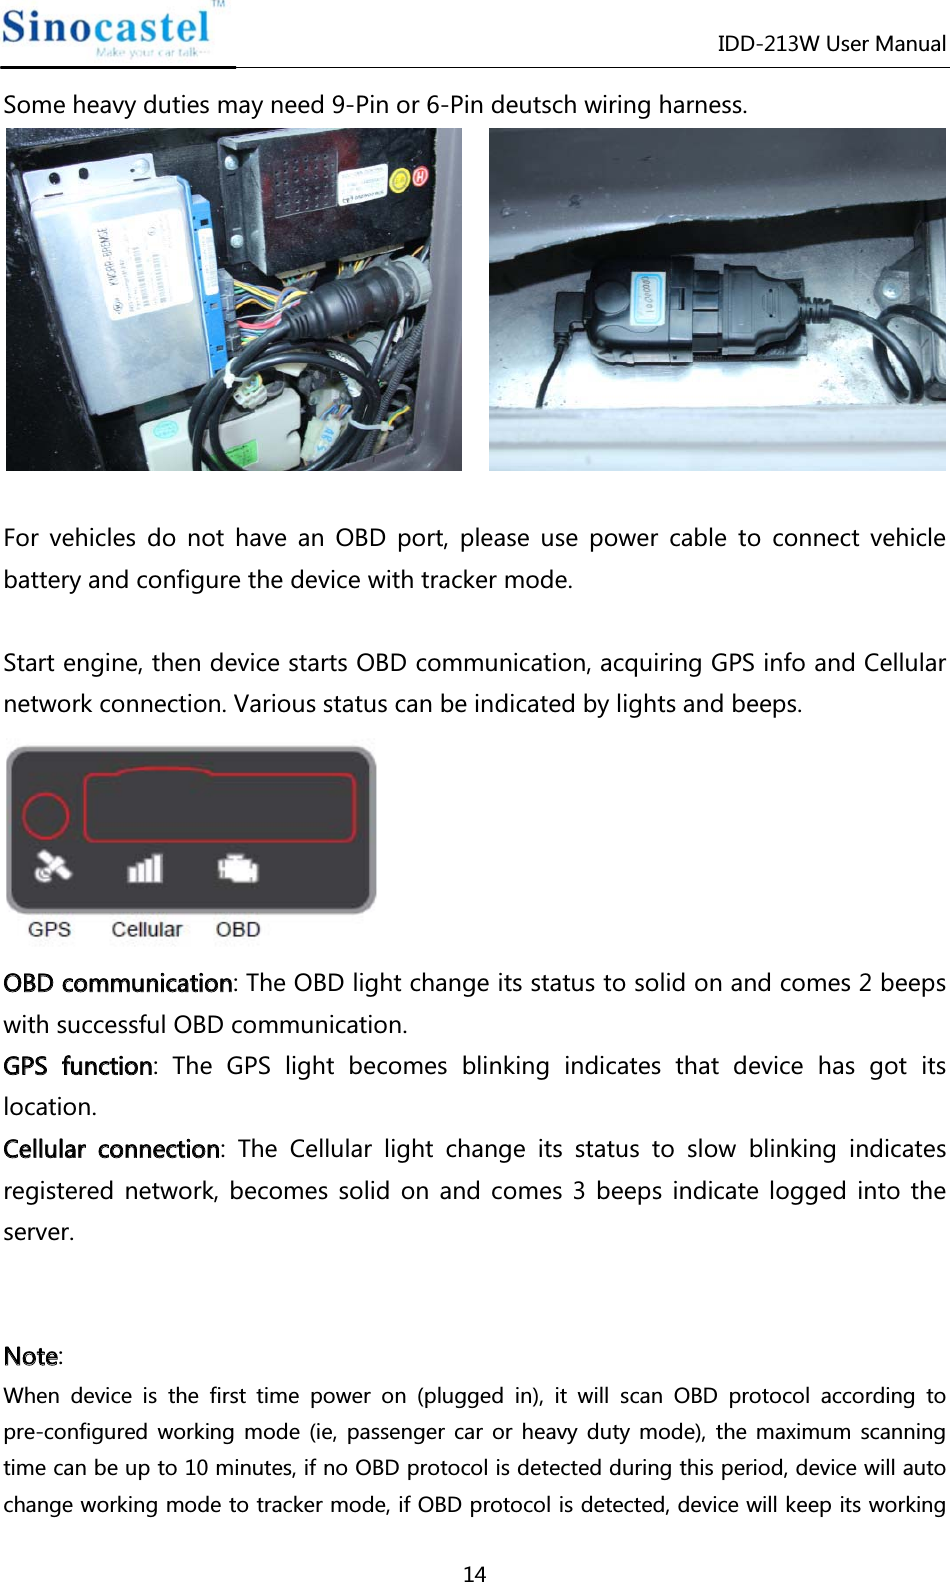 IDD-213W User Manual 14 Some heavy duties may need 9-Pin or 6-Pin deutsch wiring harness.      For vehicles do not have an OBD port, please use power cable to connect vehicle battery and configure the device with tracker mode.    Start engine, then device starts OBD communication, acquiring GPS info and Cellular network connection. Various status can be indicated by lights and beeps.  OOBBDD  ccoommmmuunniiccaattiioonn: The OBD light change its status to solid on and comes 2 beeps with successful OBD communication. GGPPSS  ffuunnccttiioonn: The GPS light becomes blinking indicates that device has got its location. CCeelllluullaarr  ccoonnnneeccttiioonn: The Cellular light change its status to slow blinking indicates registered network, becomes solid on and comes 3 beeps indicate logged into the server.     NNoottee: When device is the first time power on (plugged in), it will scan OBD protocol according to pre-configured working mode (ie, passenger car or heavy duty mode), the maximum scanning time can be up to 10 minutes, if no OBD protocol is detected during this period, device will auto change working mode to tracker mode, if OBD protocol is detected, device will keep its working 